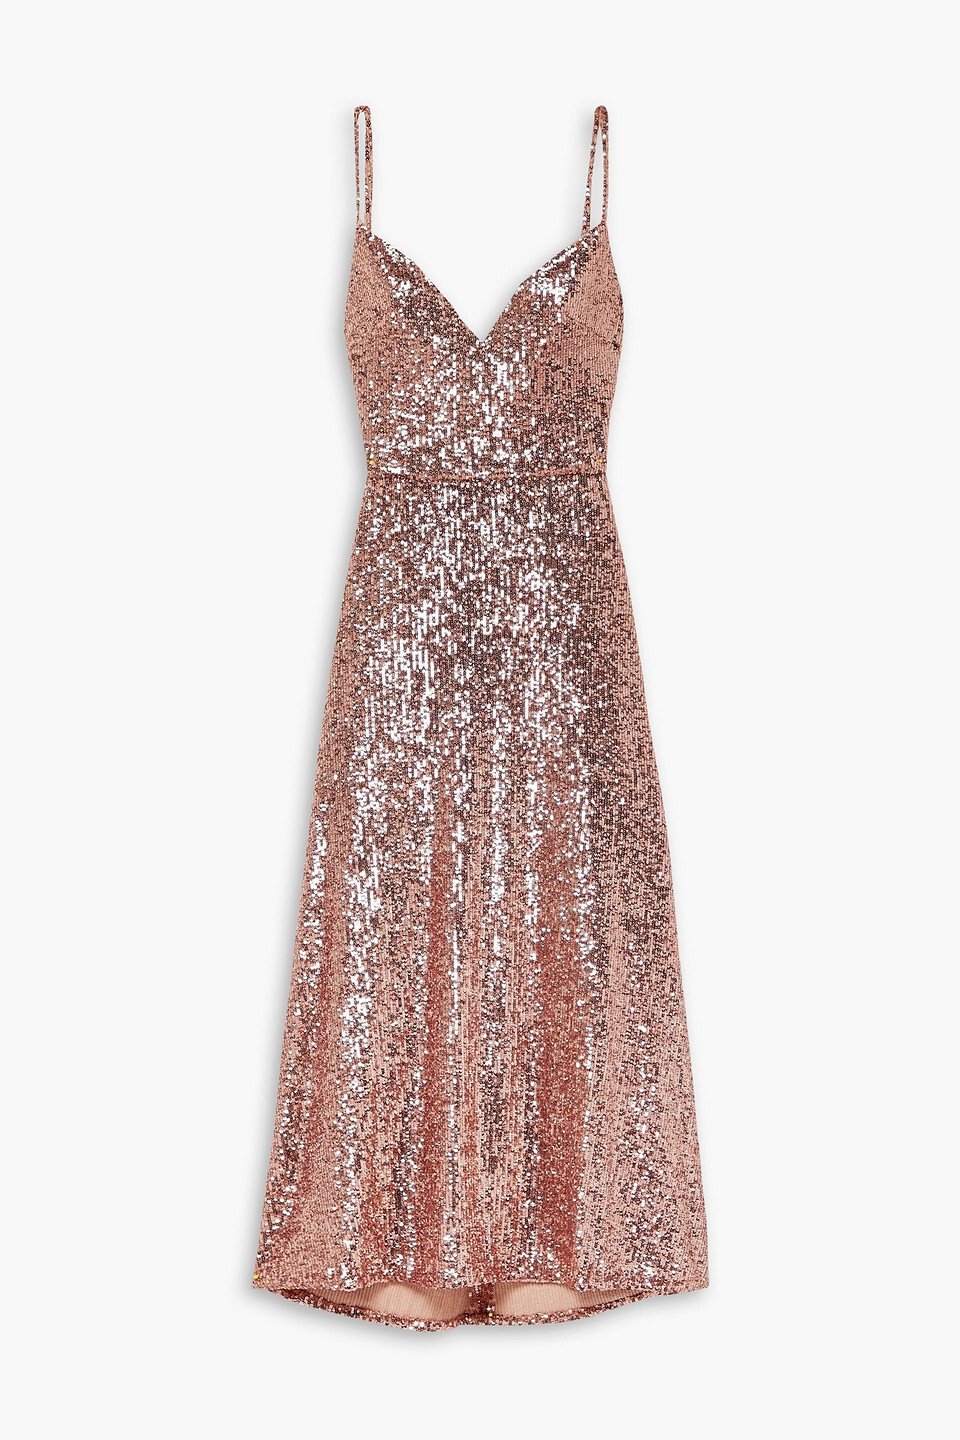 Monique Lhuillier Sequined Stretch-Tulle Midi Dress in Rose Gold.jpg